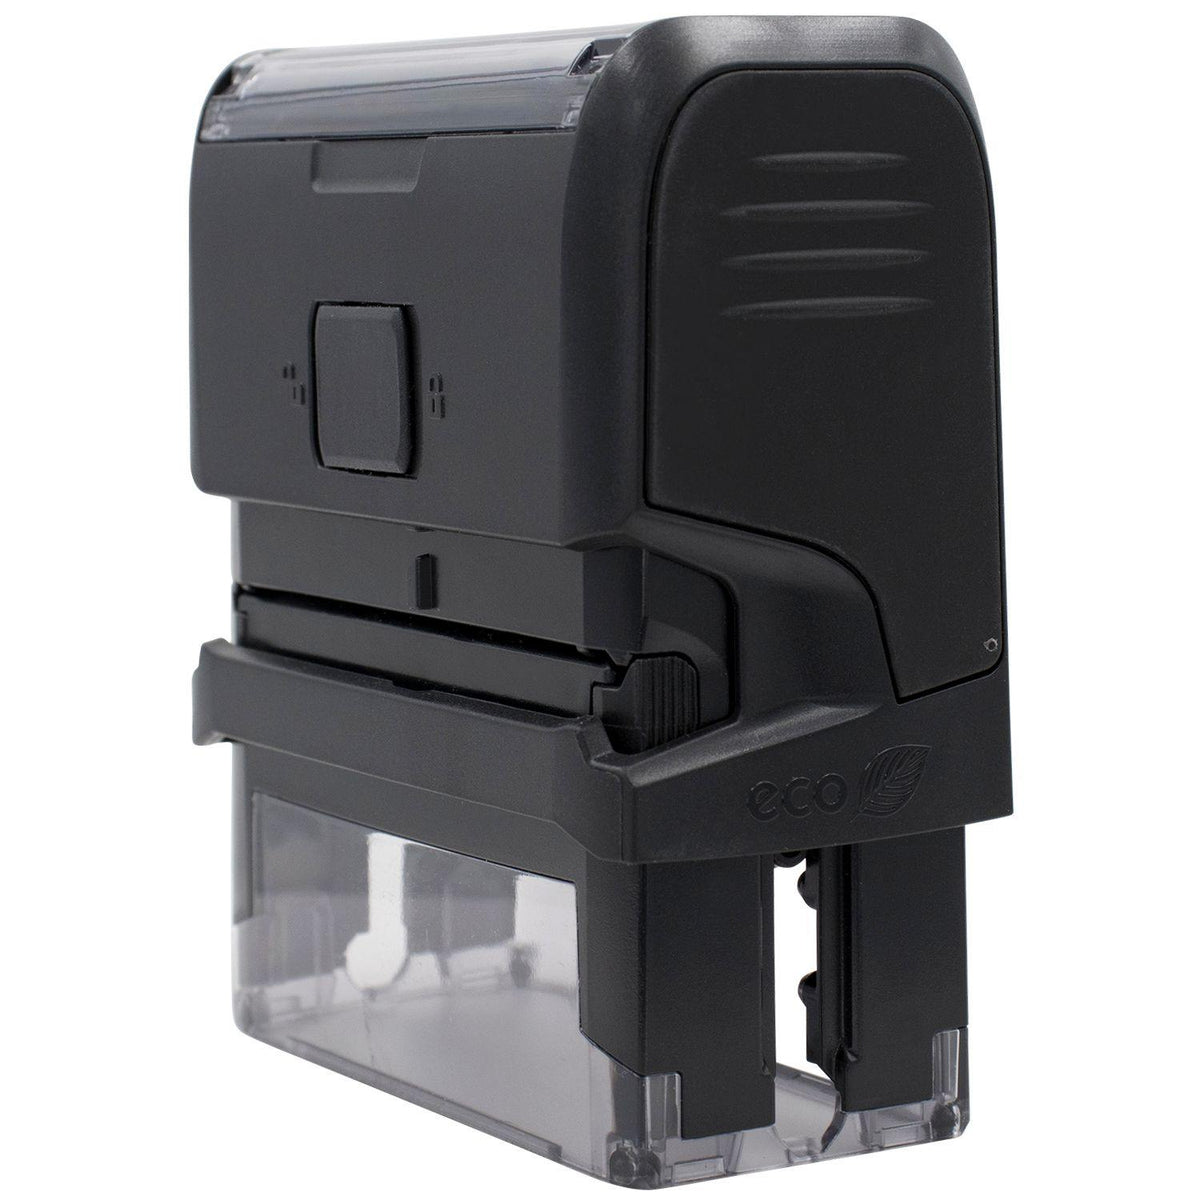 Self Inking Cancelled Stamp - Engineer Seal Stamps - Brand_Trodat, Impression Size_Small, Stamp Type_Self-Inking Stamp, Type of Use_Office